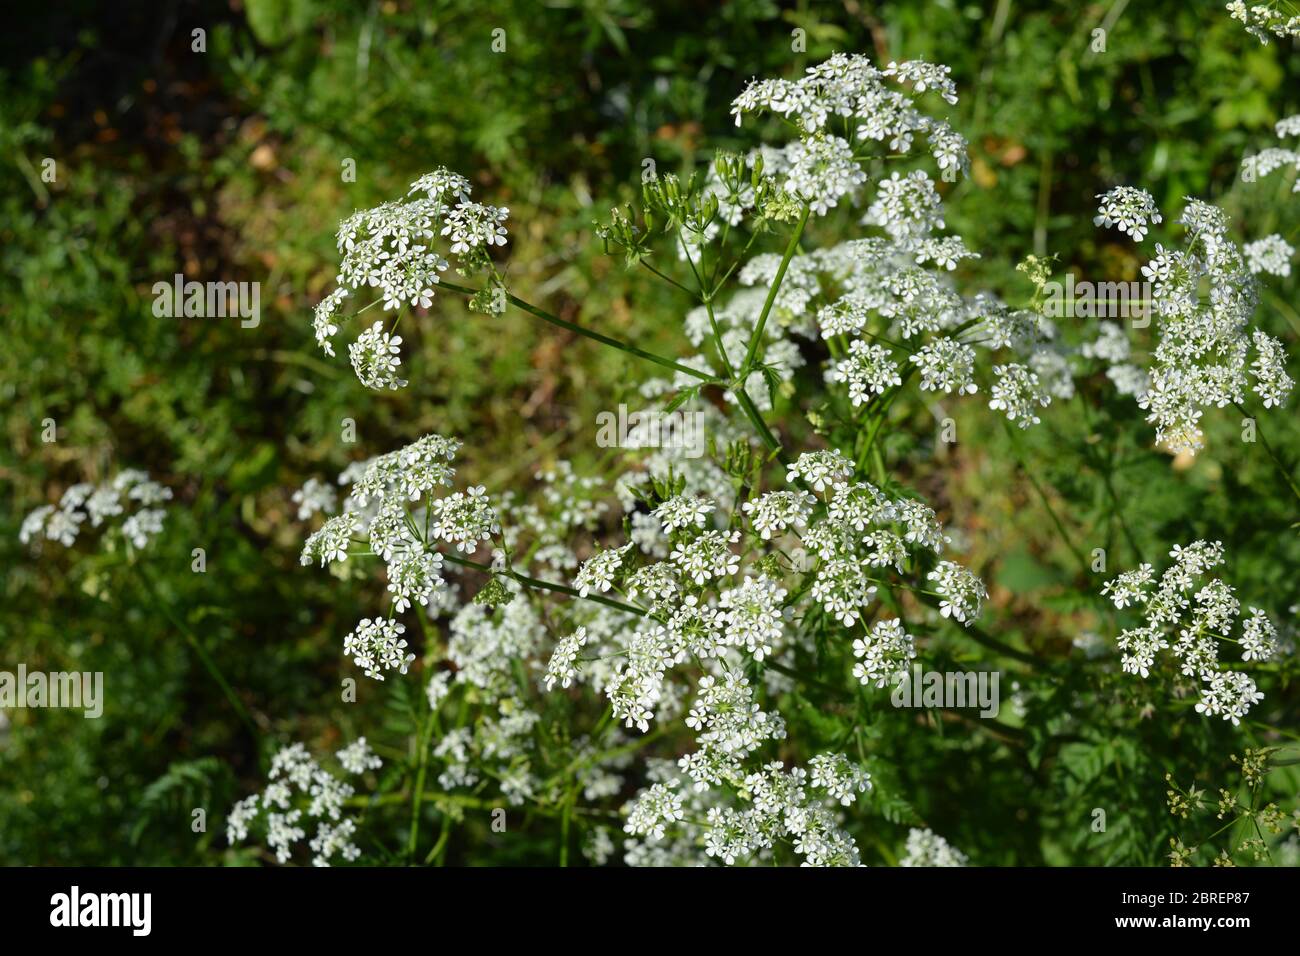 Delicate white flowers of Cow Parsley, also known as Anthriscus sylvestris Stock Photo